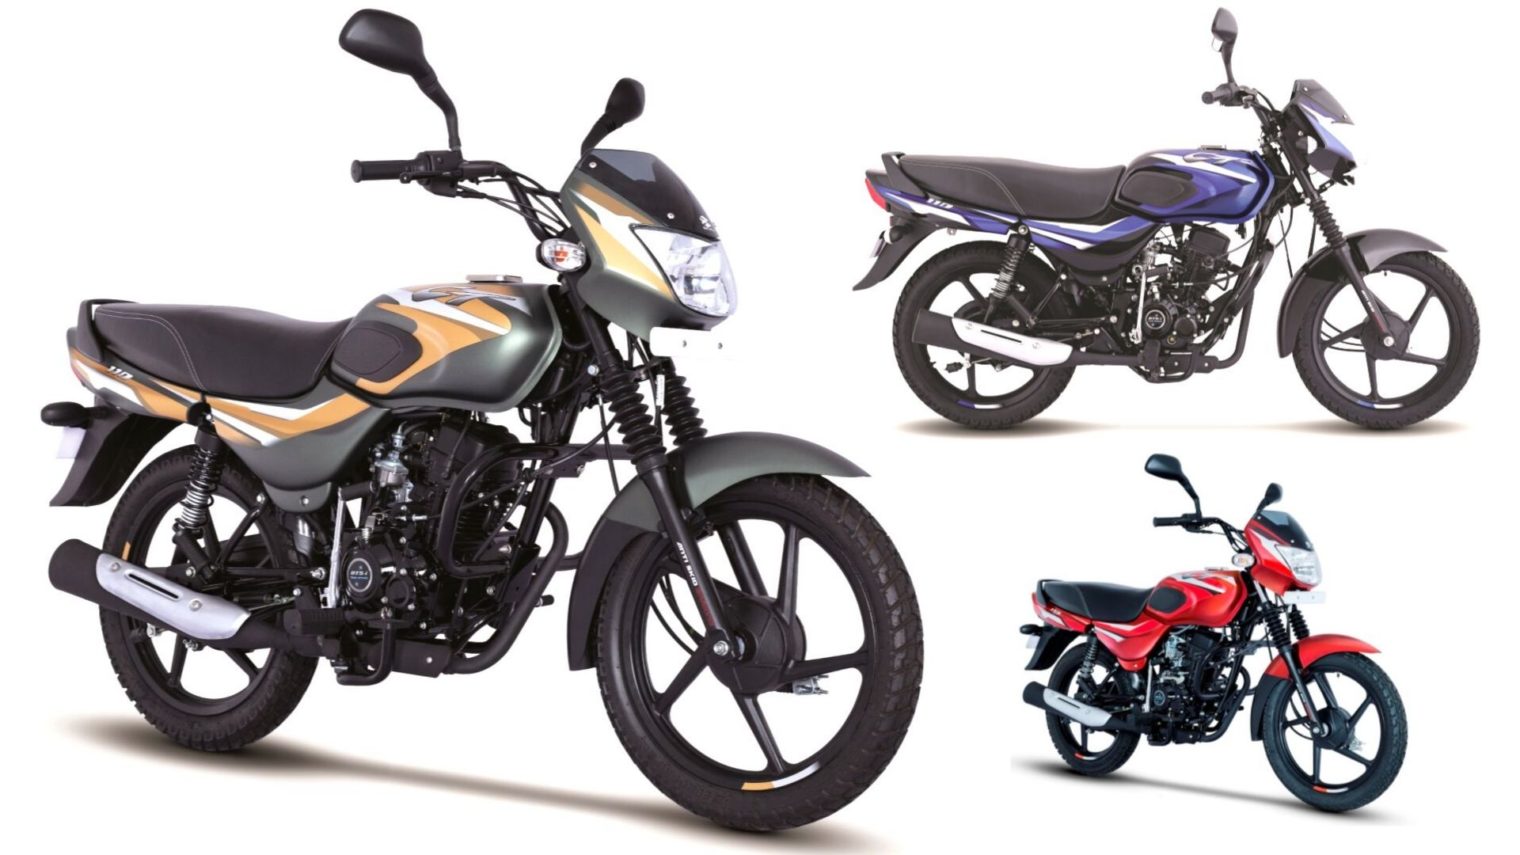 Bs6 Bajaj Ct 100 Bajaj Platina Launched In India From Rs 47 624